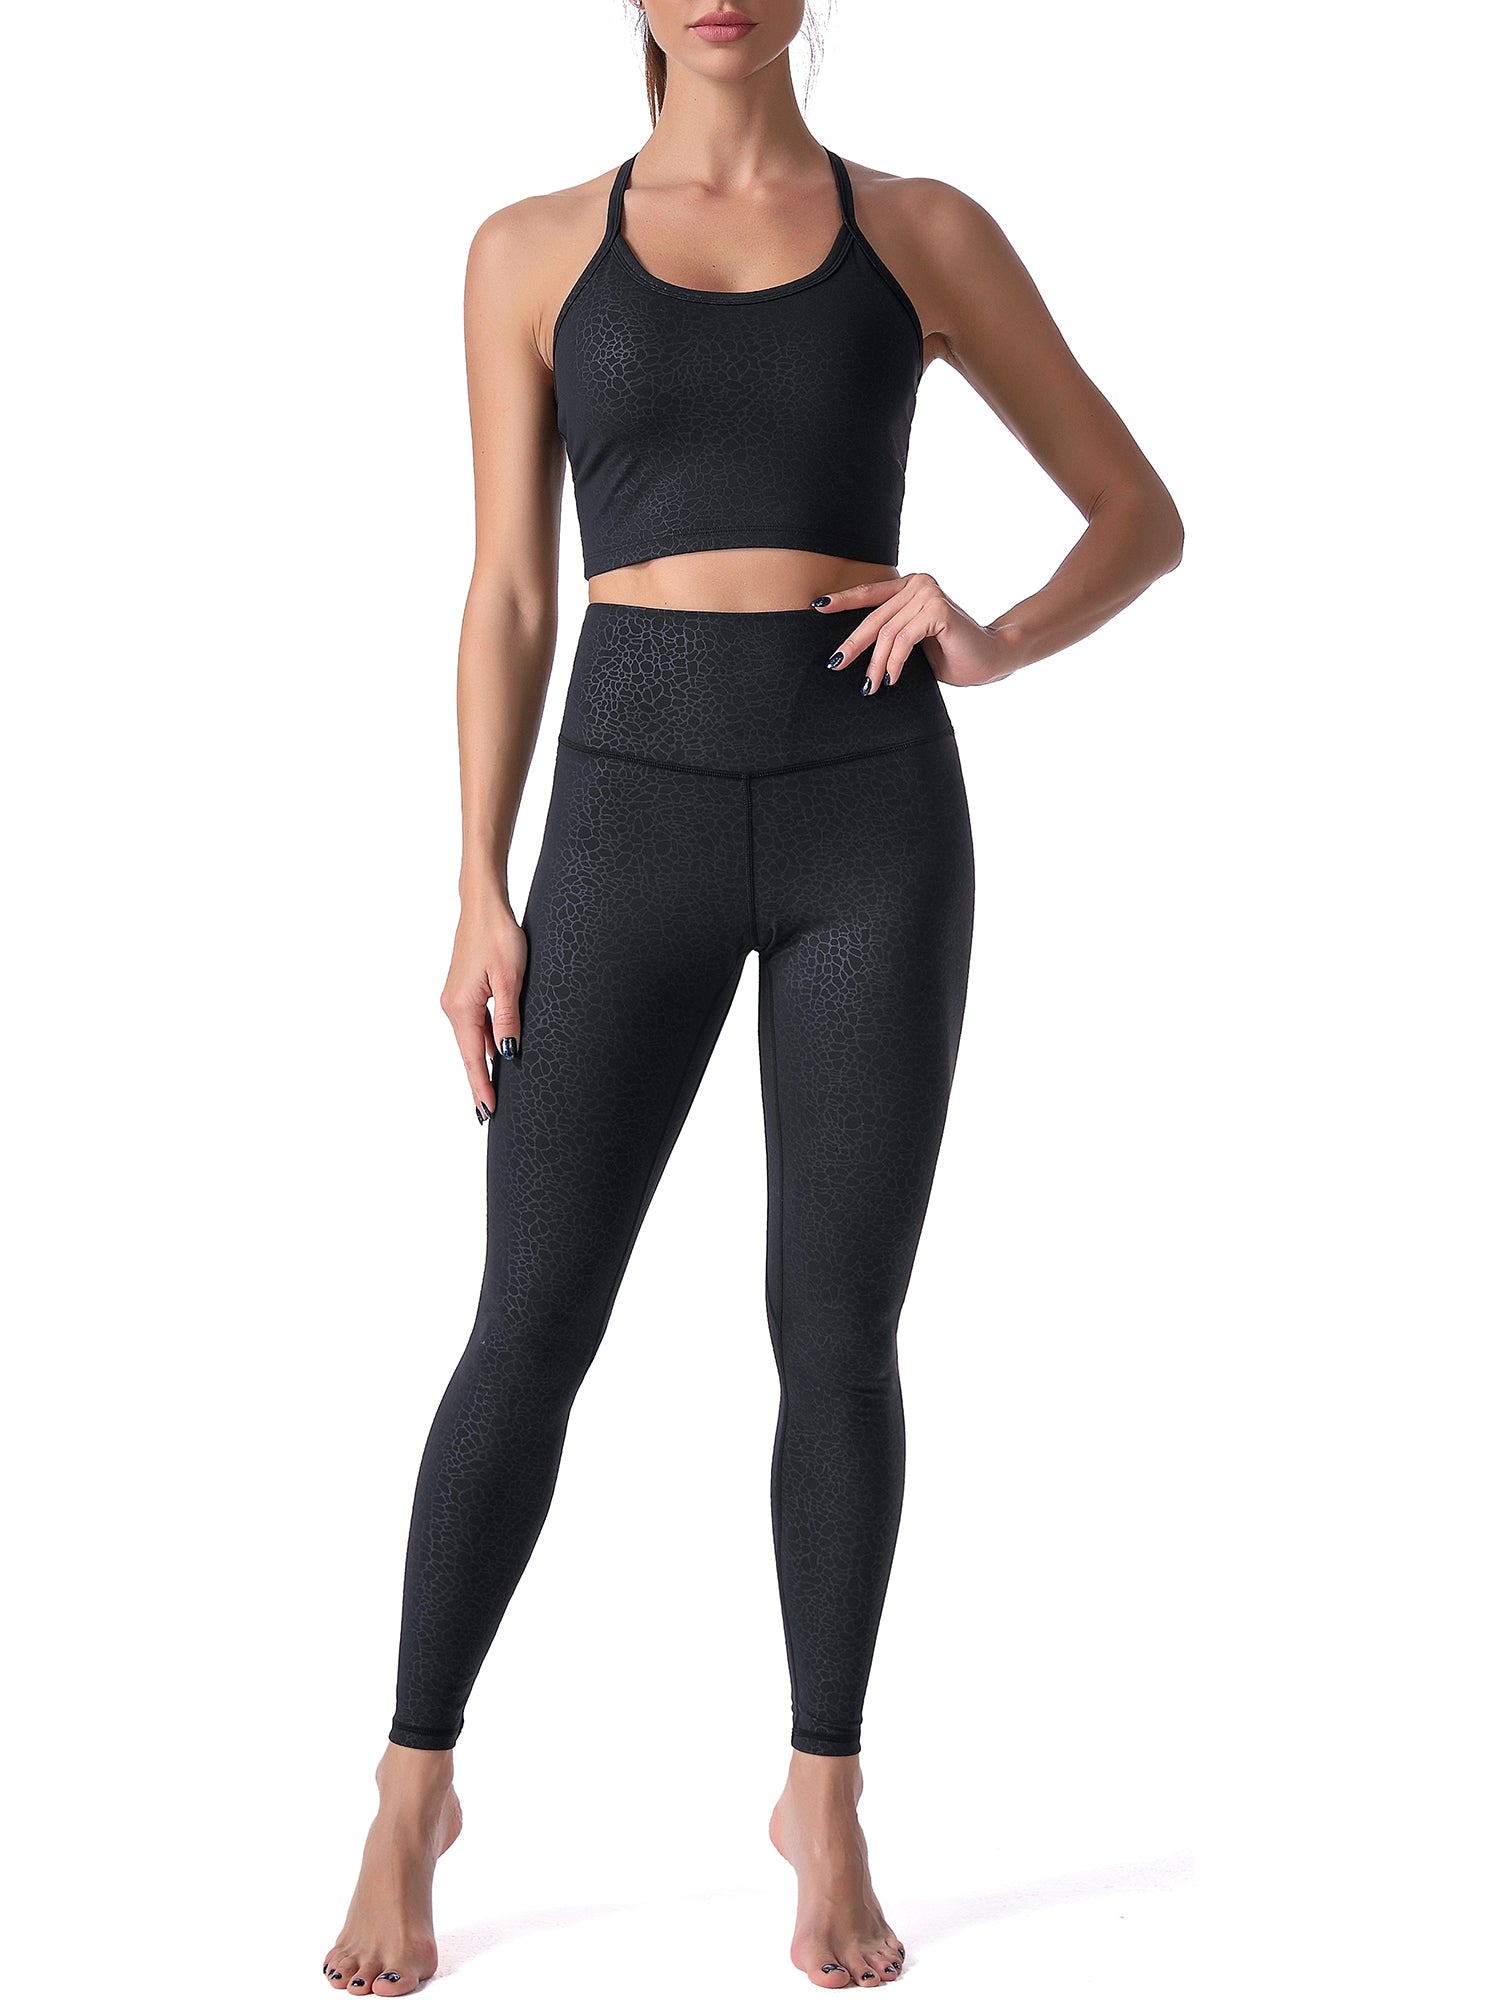 Sunzel Workout Leggings for Women, Squat Proof High Waisted Yoga Pants 4  Way Stretch, Buttery Soft 28 Inseam Black Peacock XS